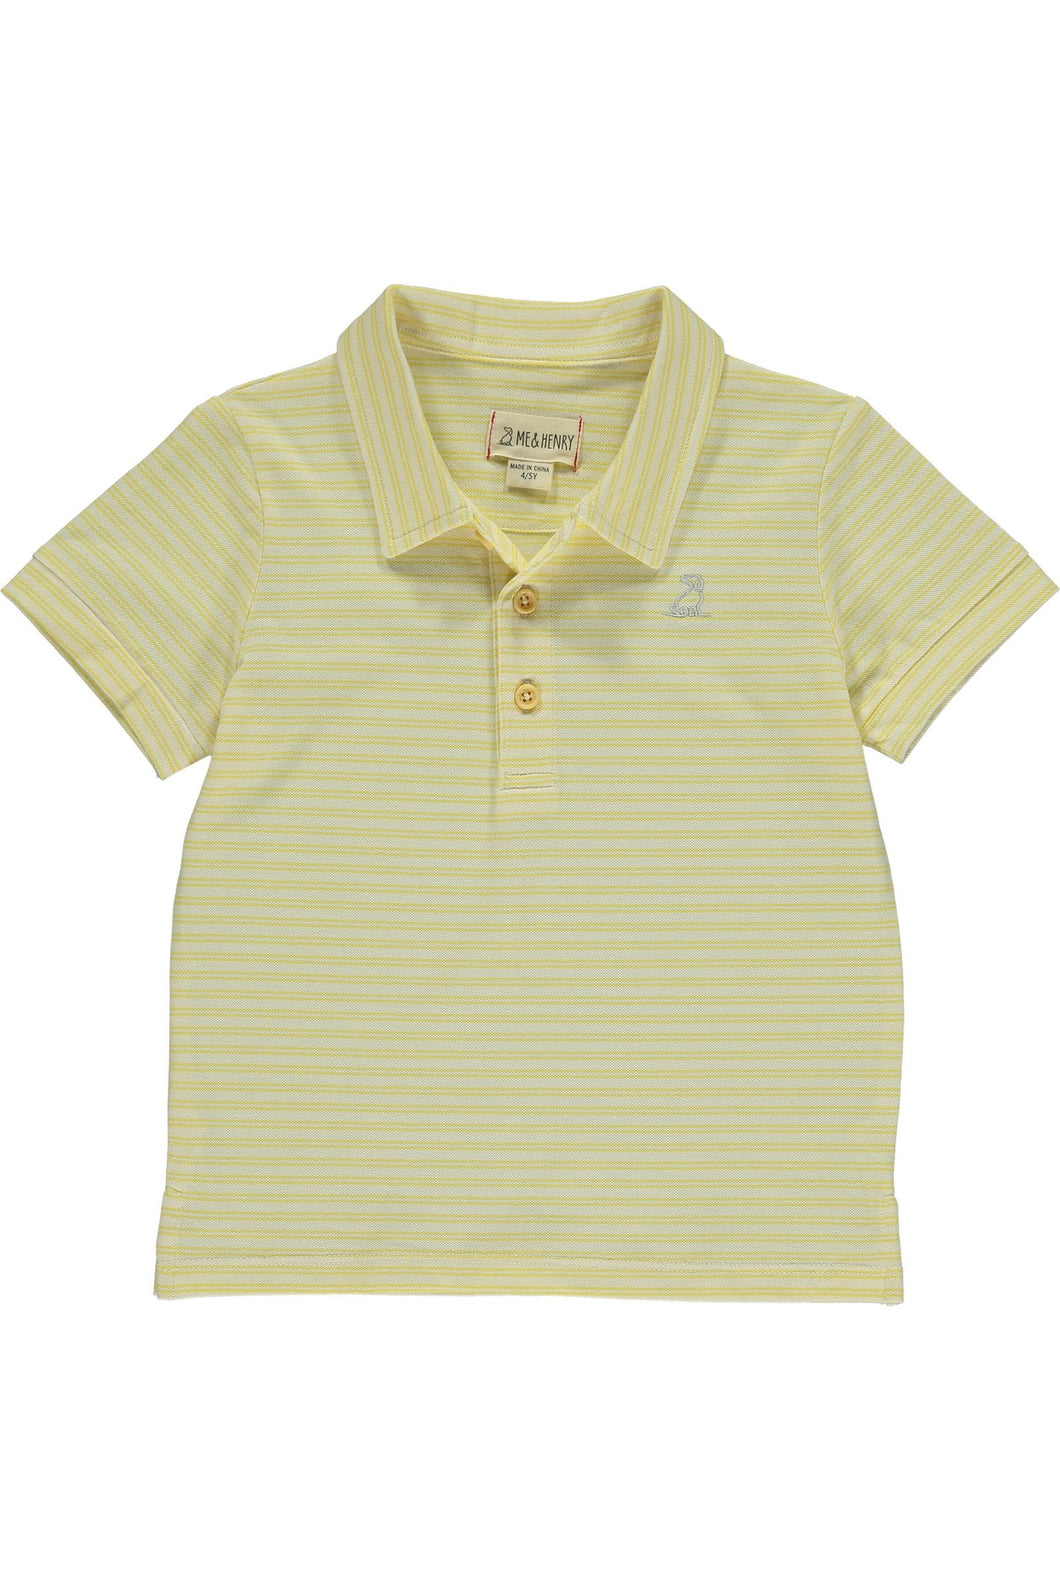 SS STARBOARD STRIPED POLO